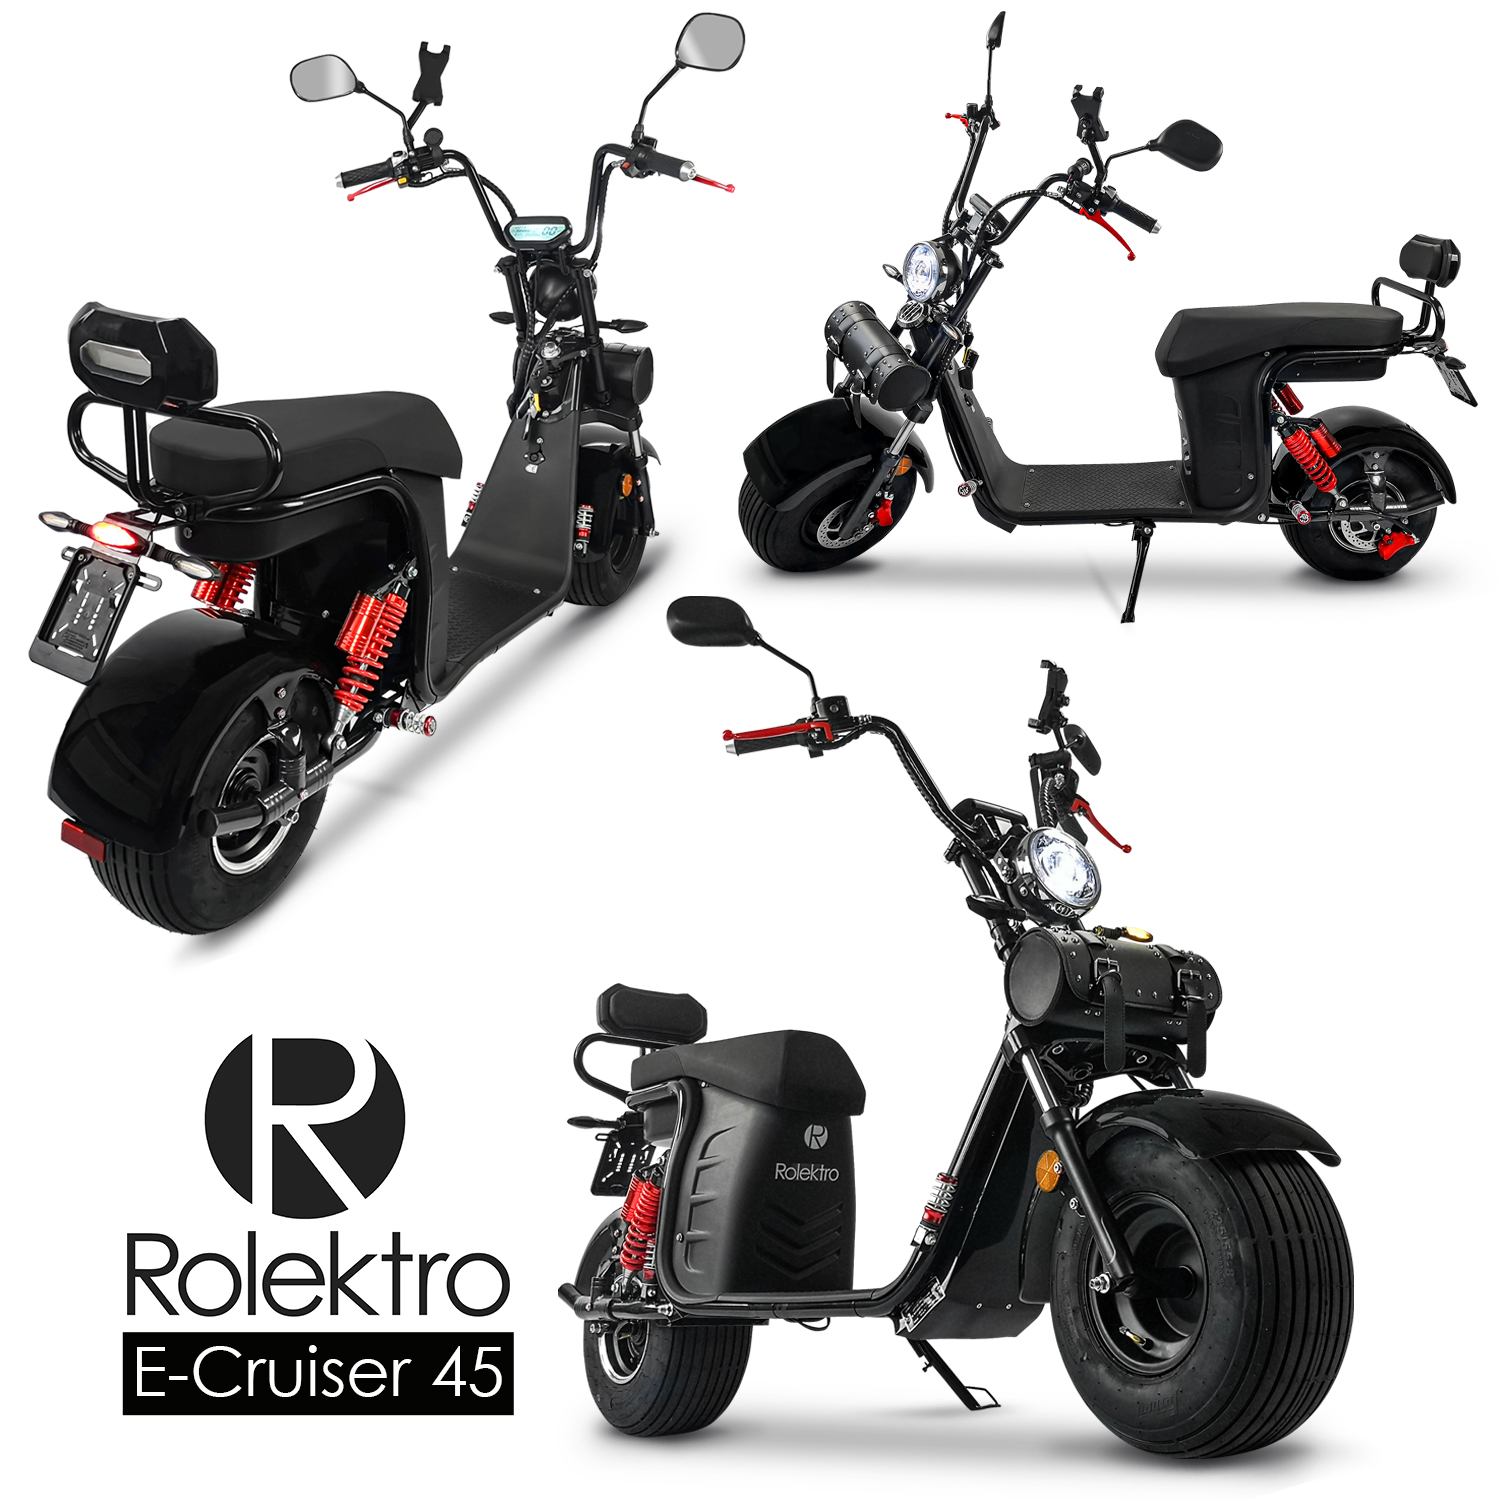 lithium - 45 2 electric battery E-Cruiser Rolektro scooter incl. elektro2rad.de batteries with